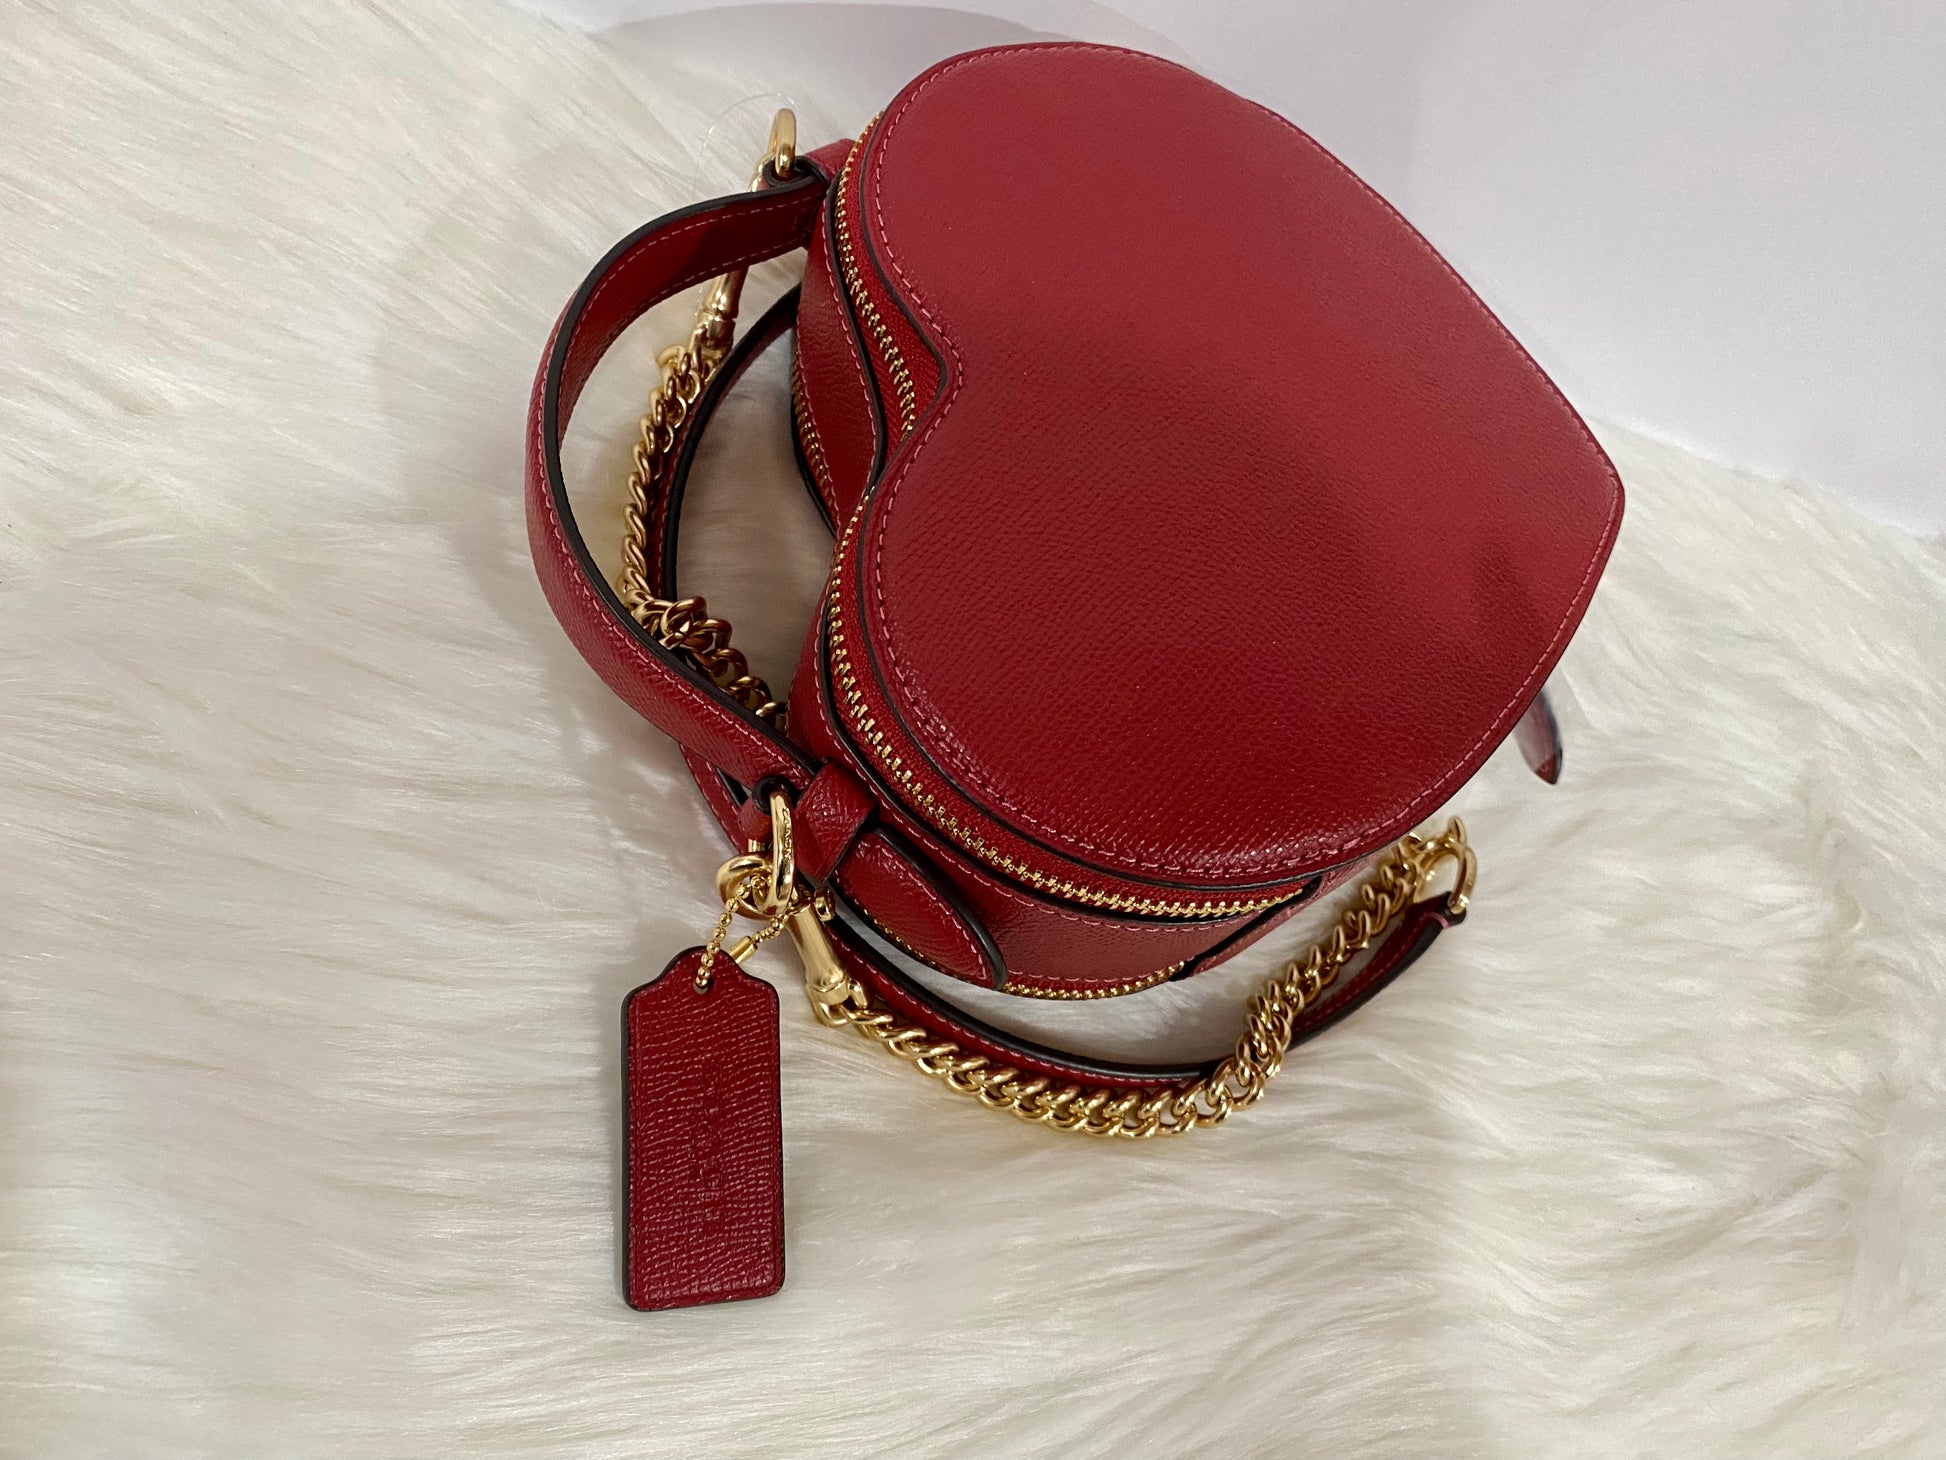 COACH Heart Zip Leather Chain Crossbody Bag in Red